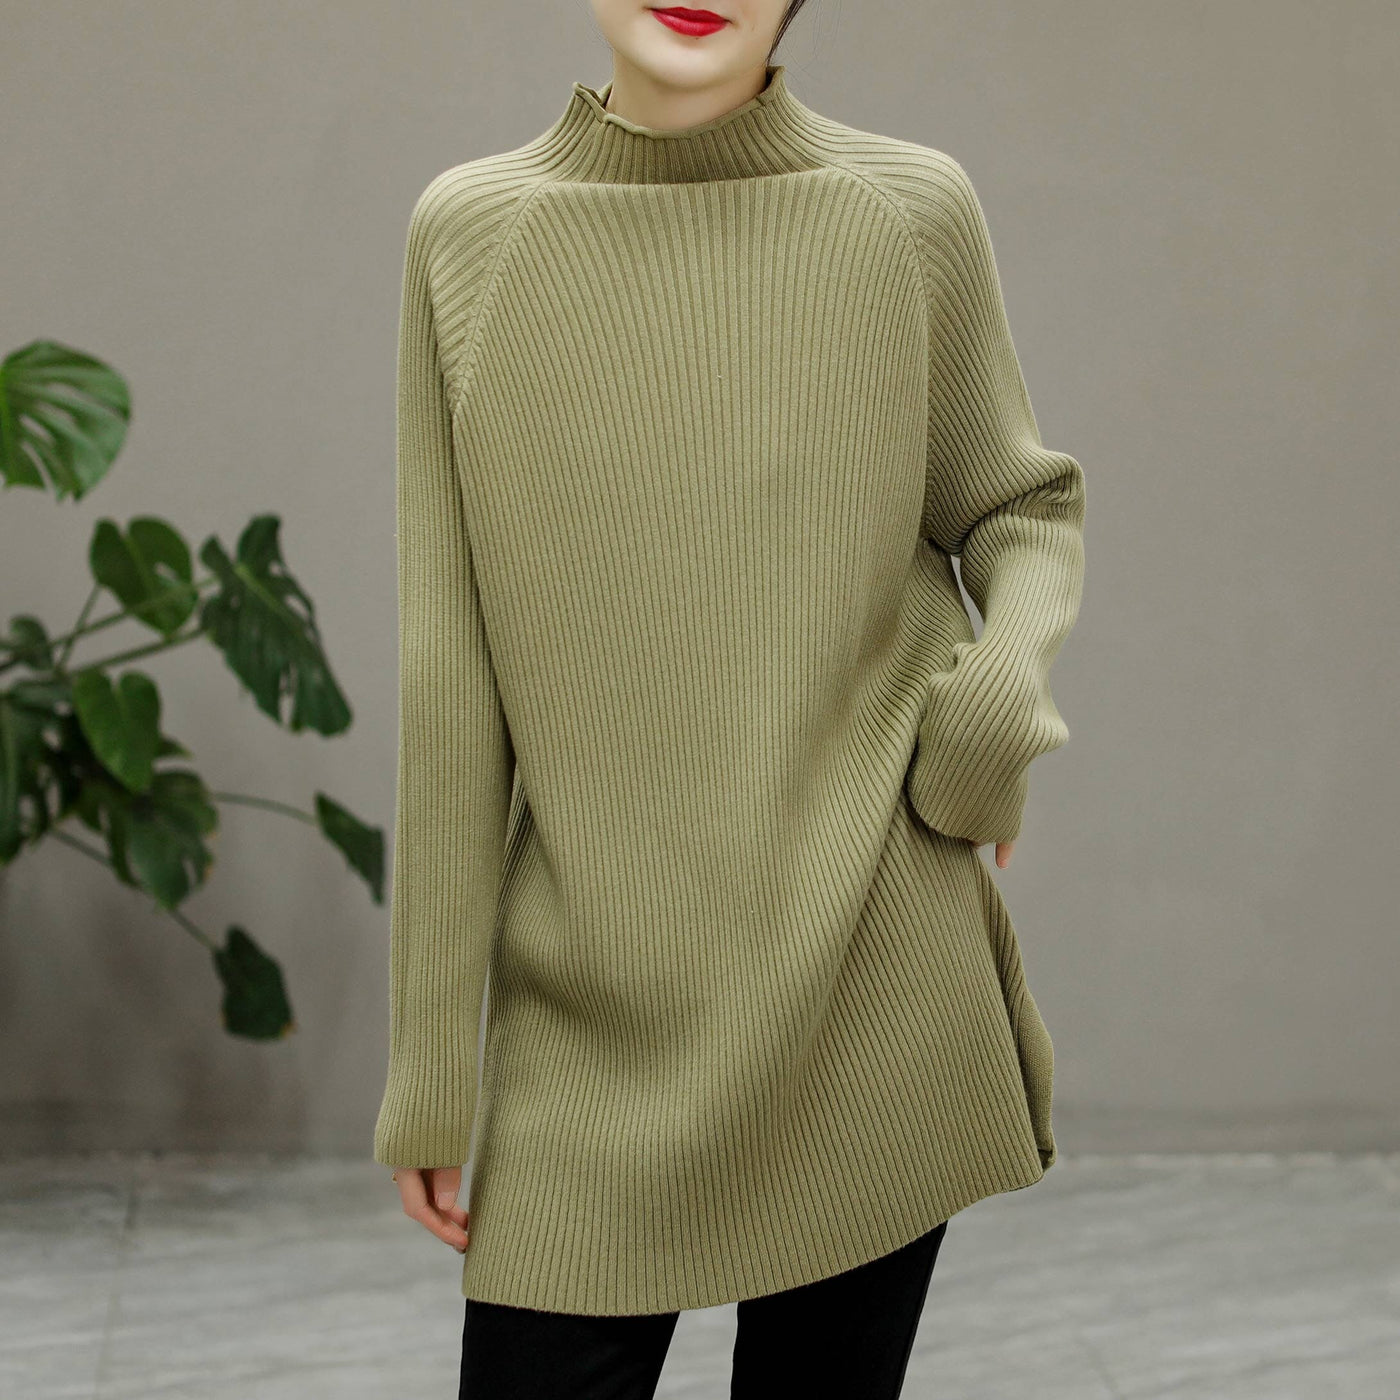 Winter Knitted Solid Stripe Turtleneck Elastic Long Sweater Dec 2022 New Arrival One Size Light Green 